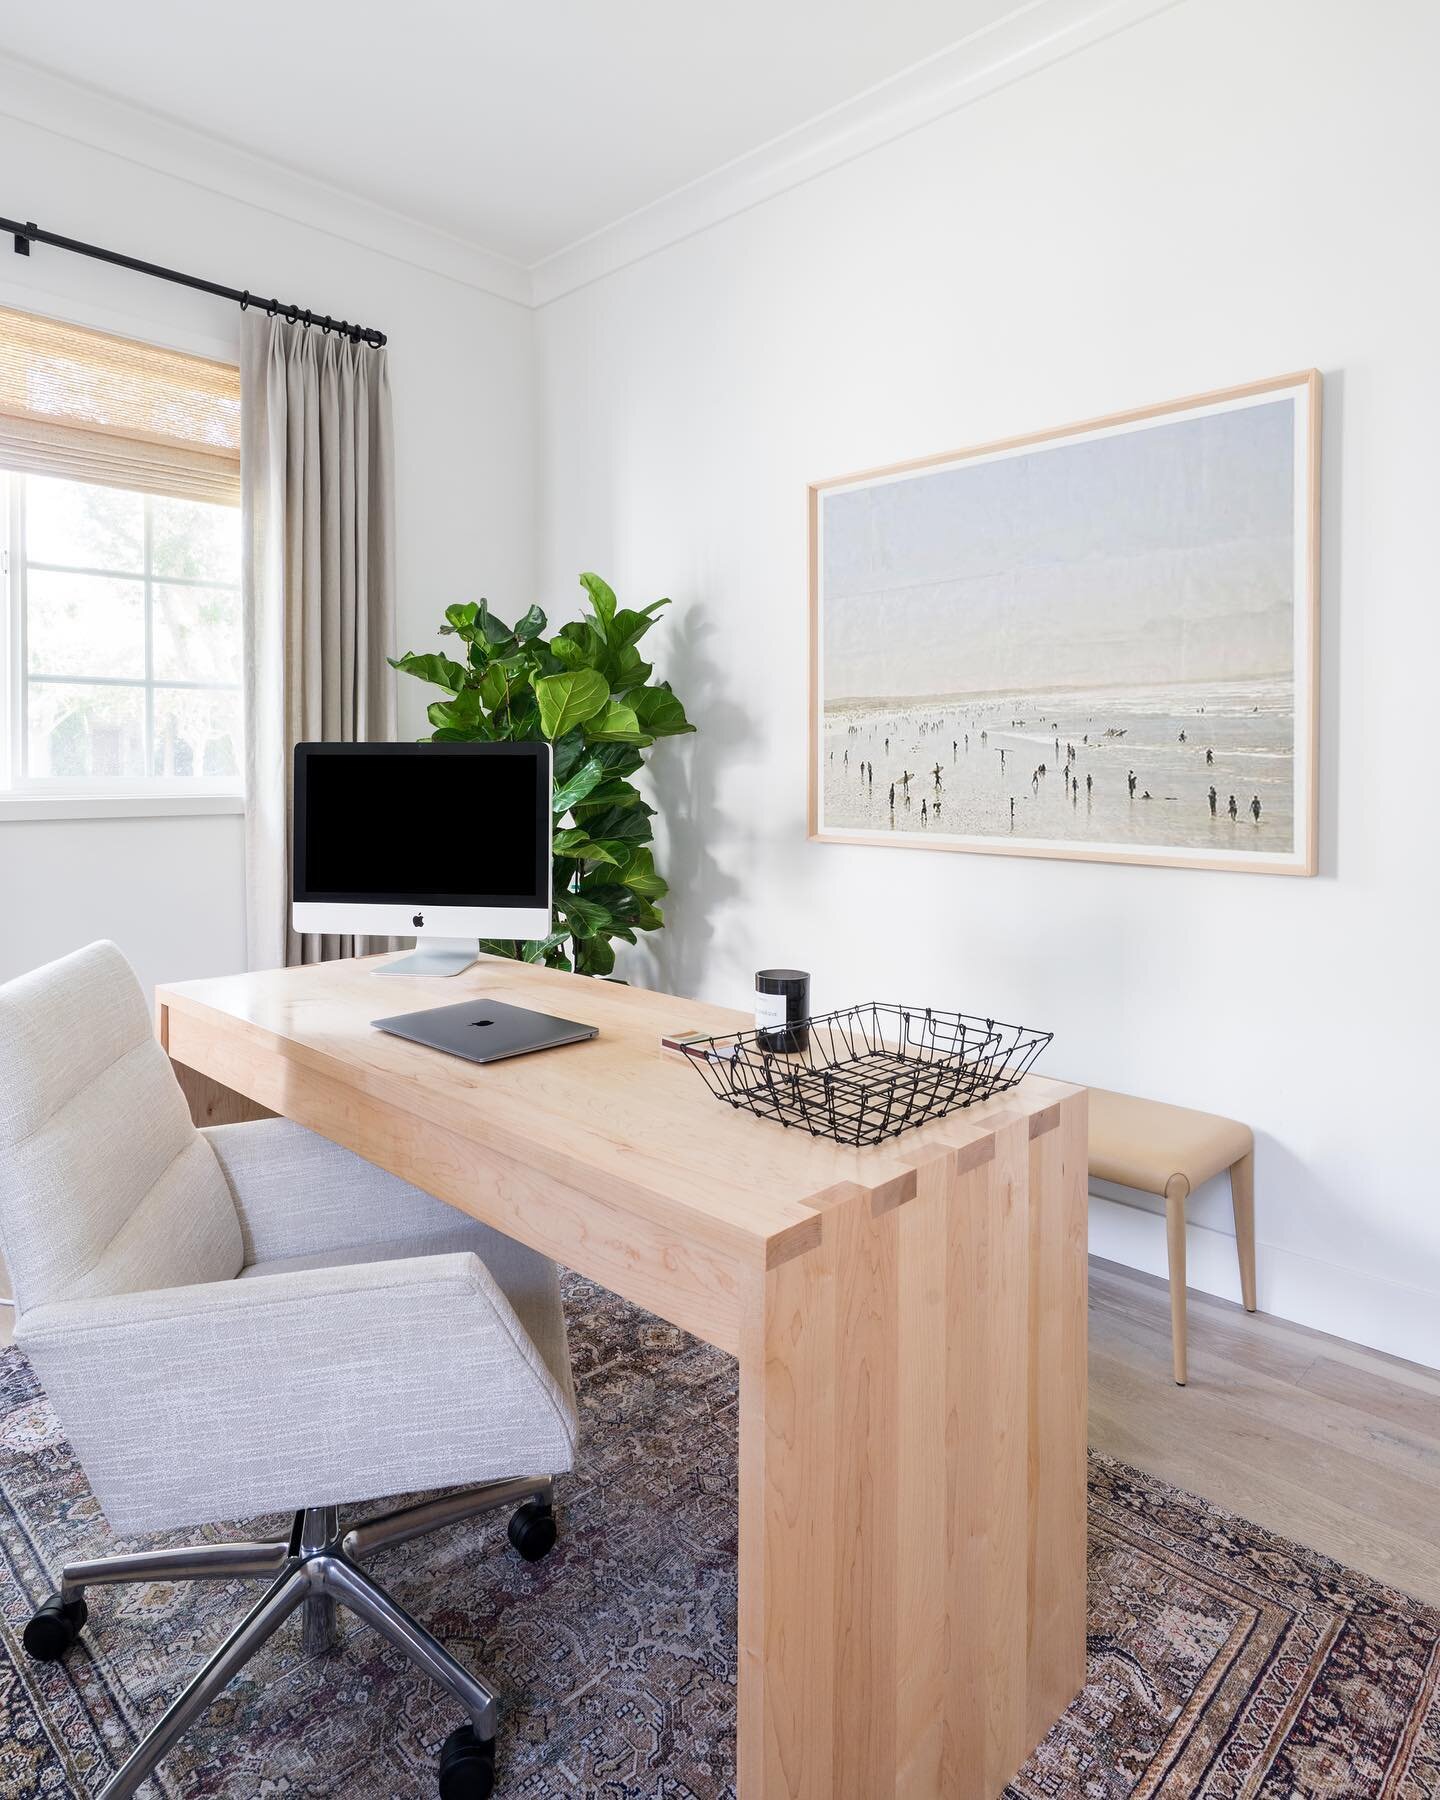 Still drooling over the office from our #CamdenRemodel 🤤
Who else would never want to leave this space? 😉 (📷: @charlotteleaphotography)
-
-
#interiordesign #homeremodel #interiordesigner #officedesign #officedecor #smmakelifebeautiful